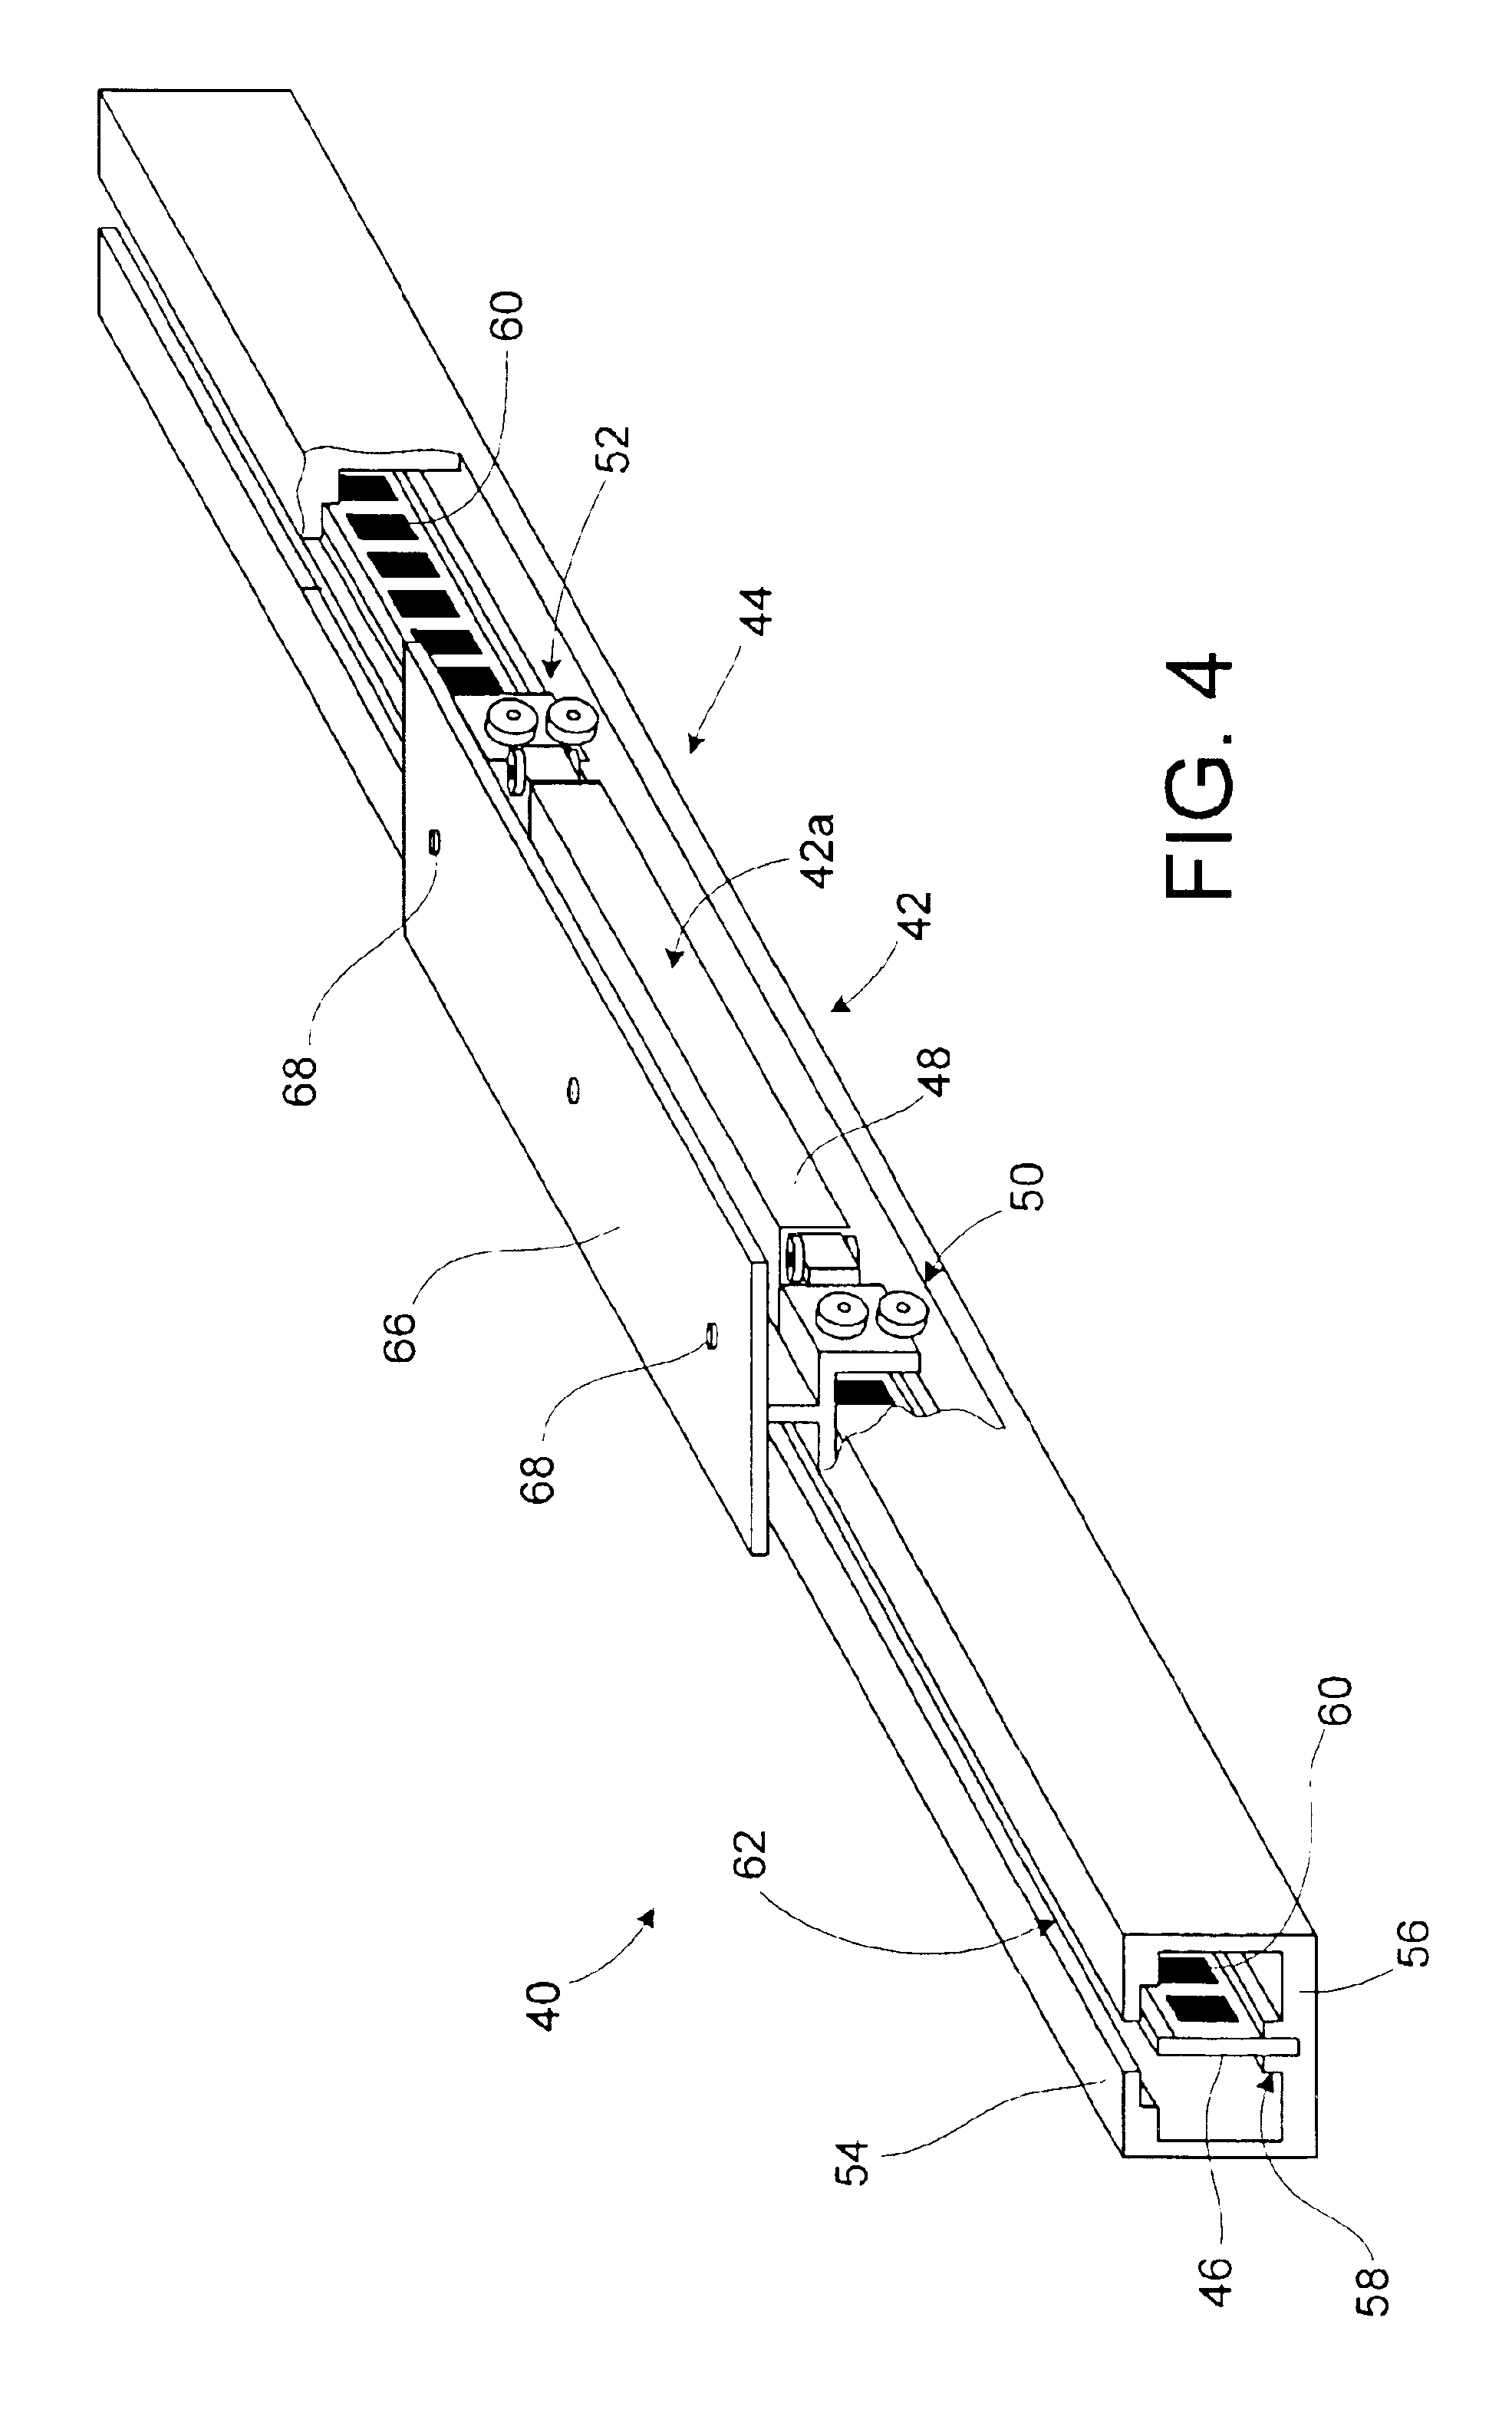 Linear motor with magnet rail support, end effect cogging reduction, and segmented armature